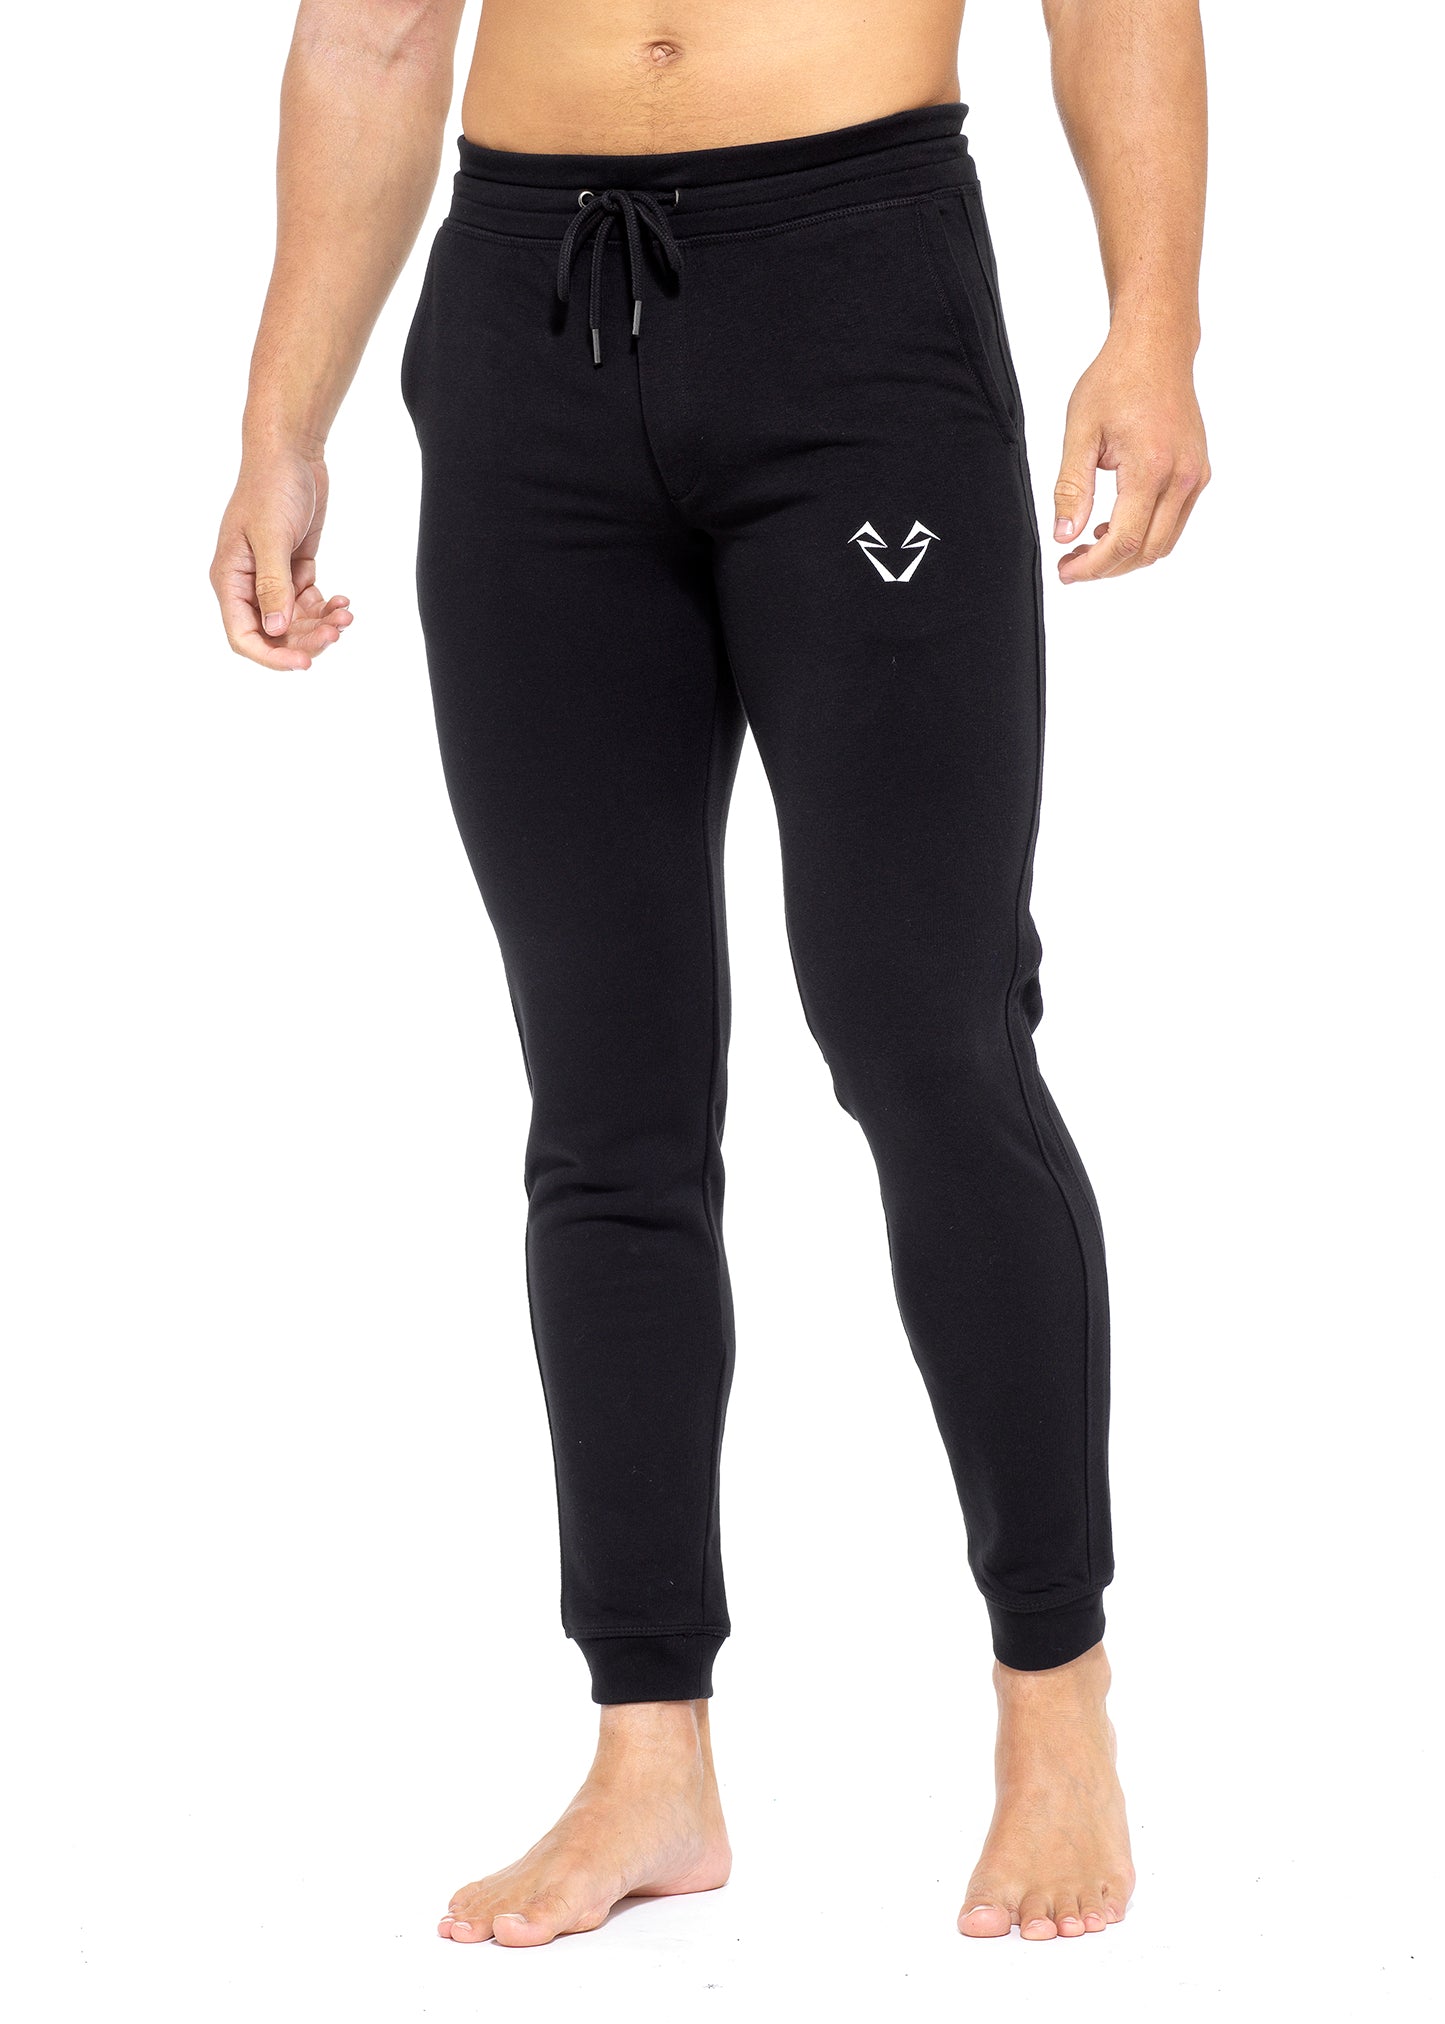 Muscle fit joggers